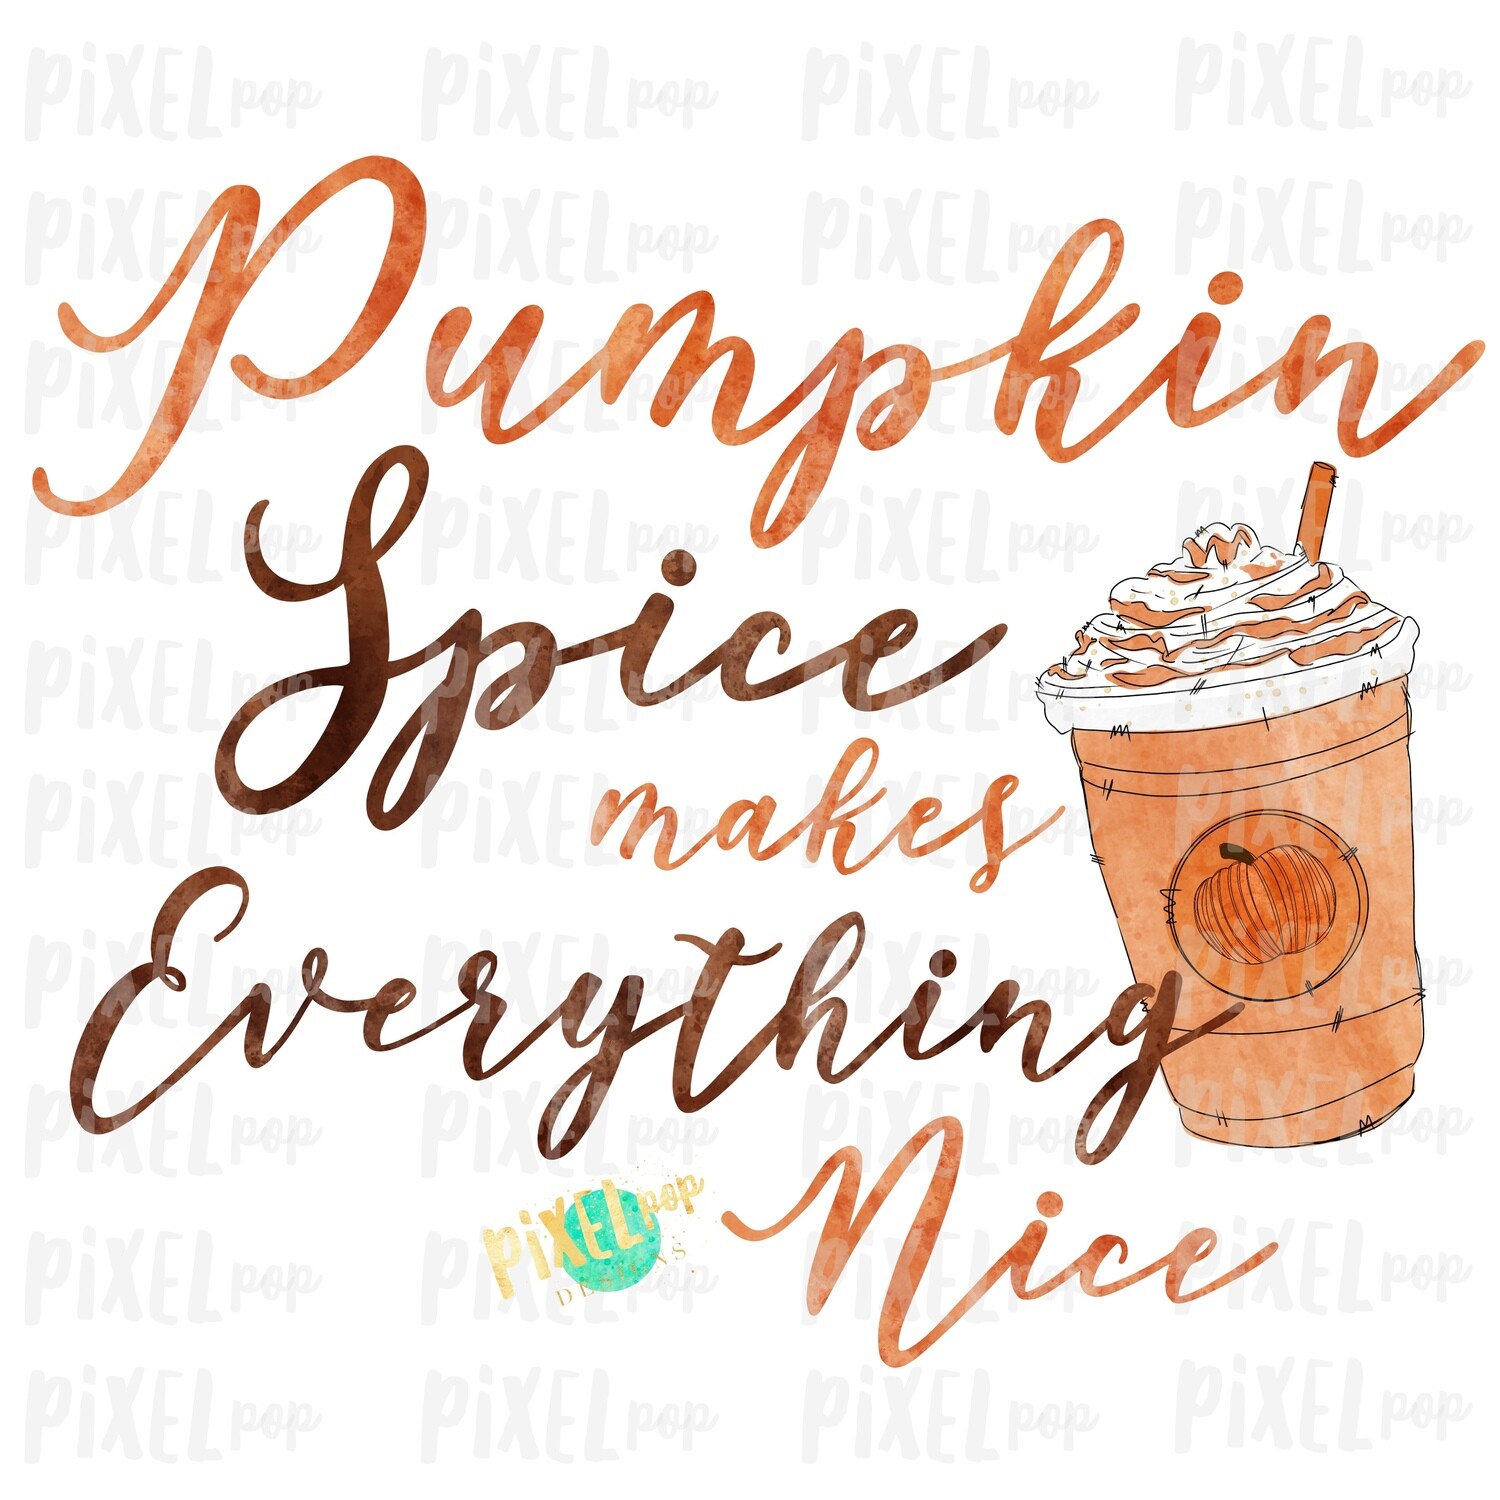 Pumpkin Spice Makes Everything Nice Frappe Coffee Sublimation Design PNG | Hand Drawn PNG | | Digital Download | Printable Art | Clip Art